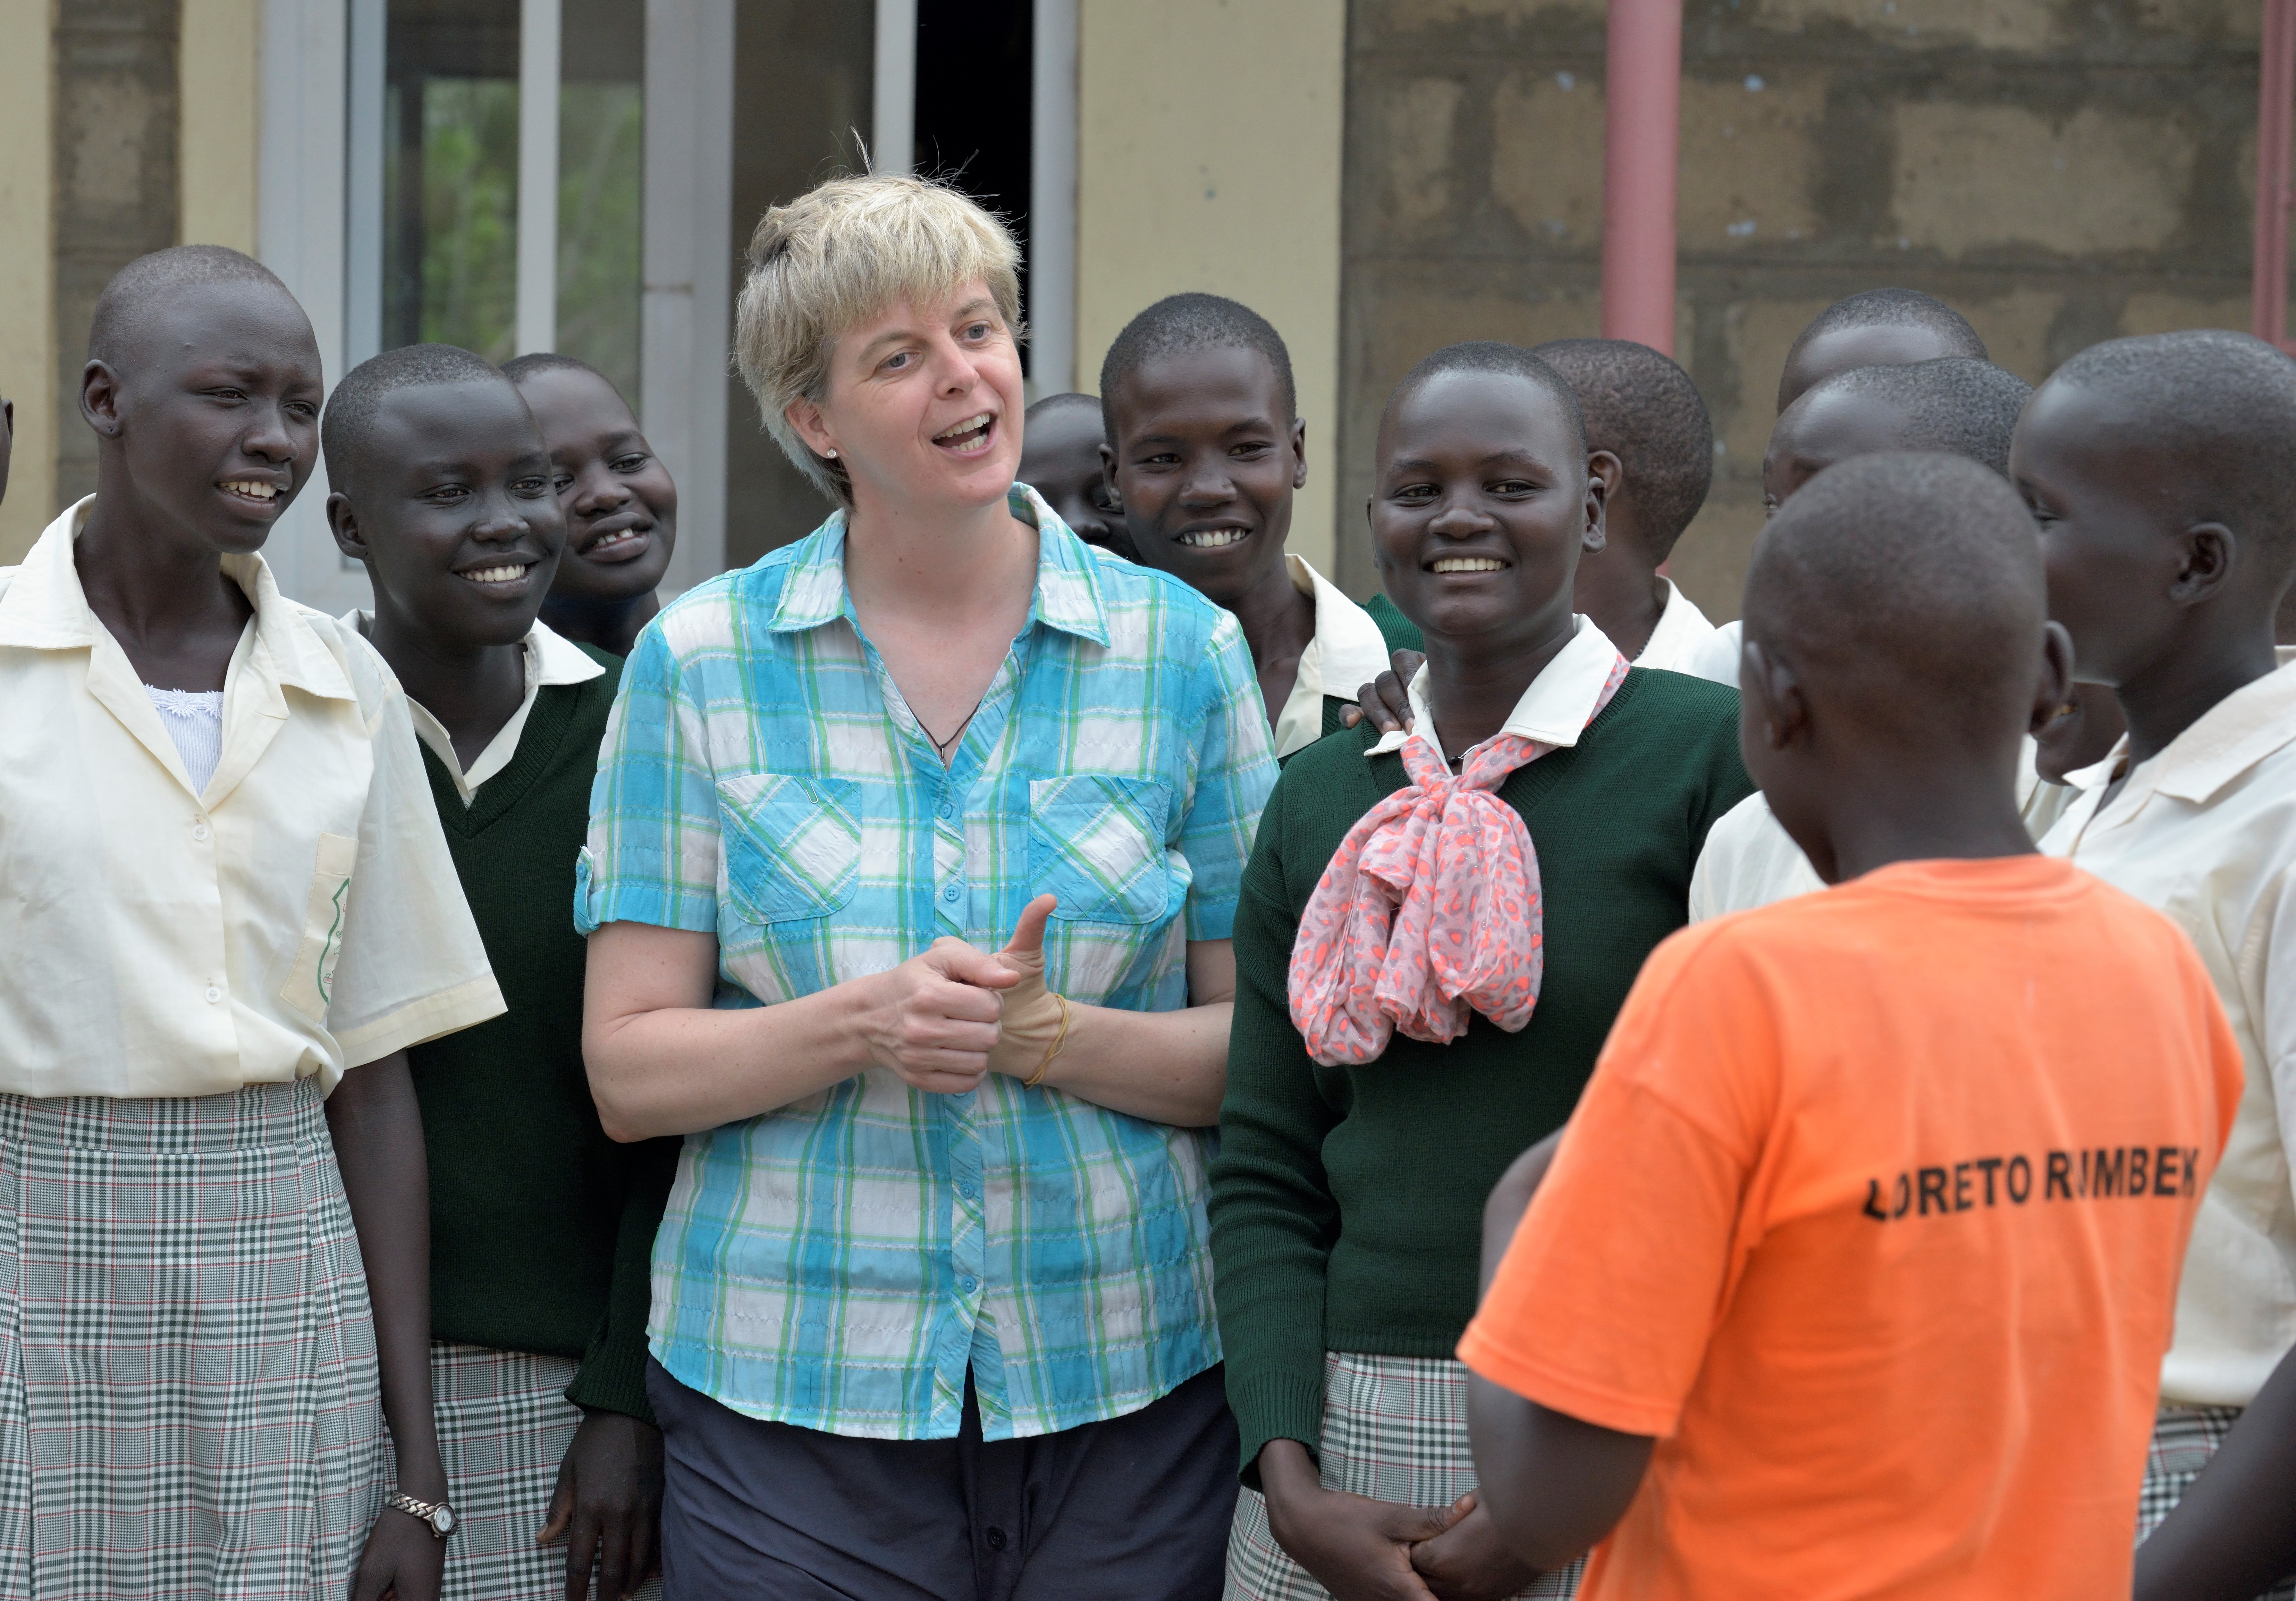 Sr. Orla Treacy with students at her school in Rumbek, South Sudan